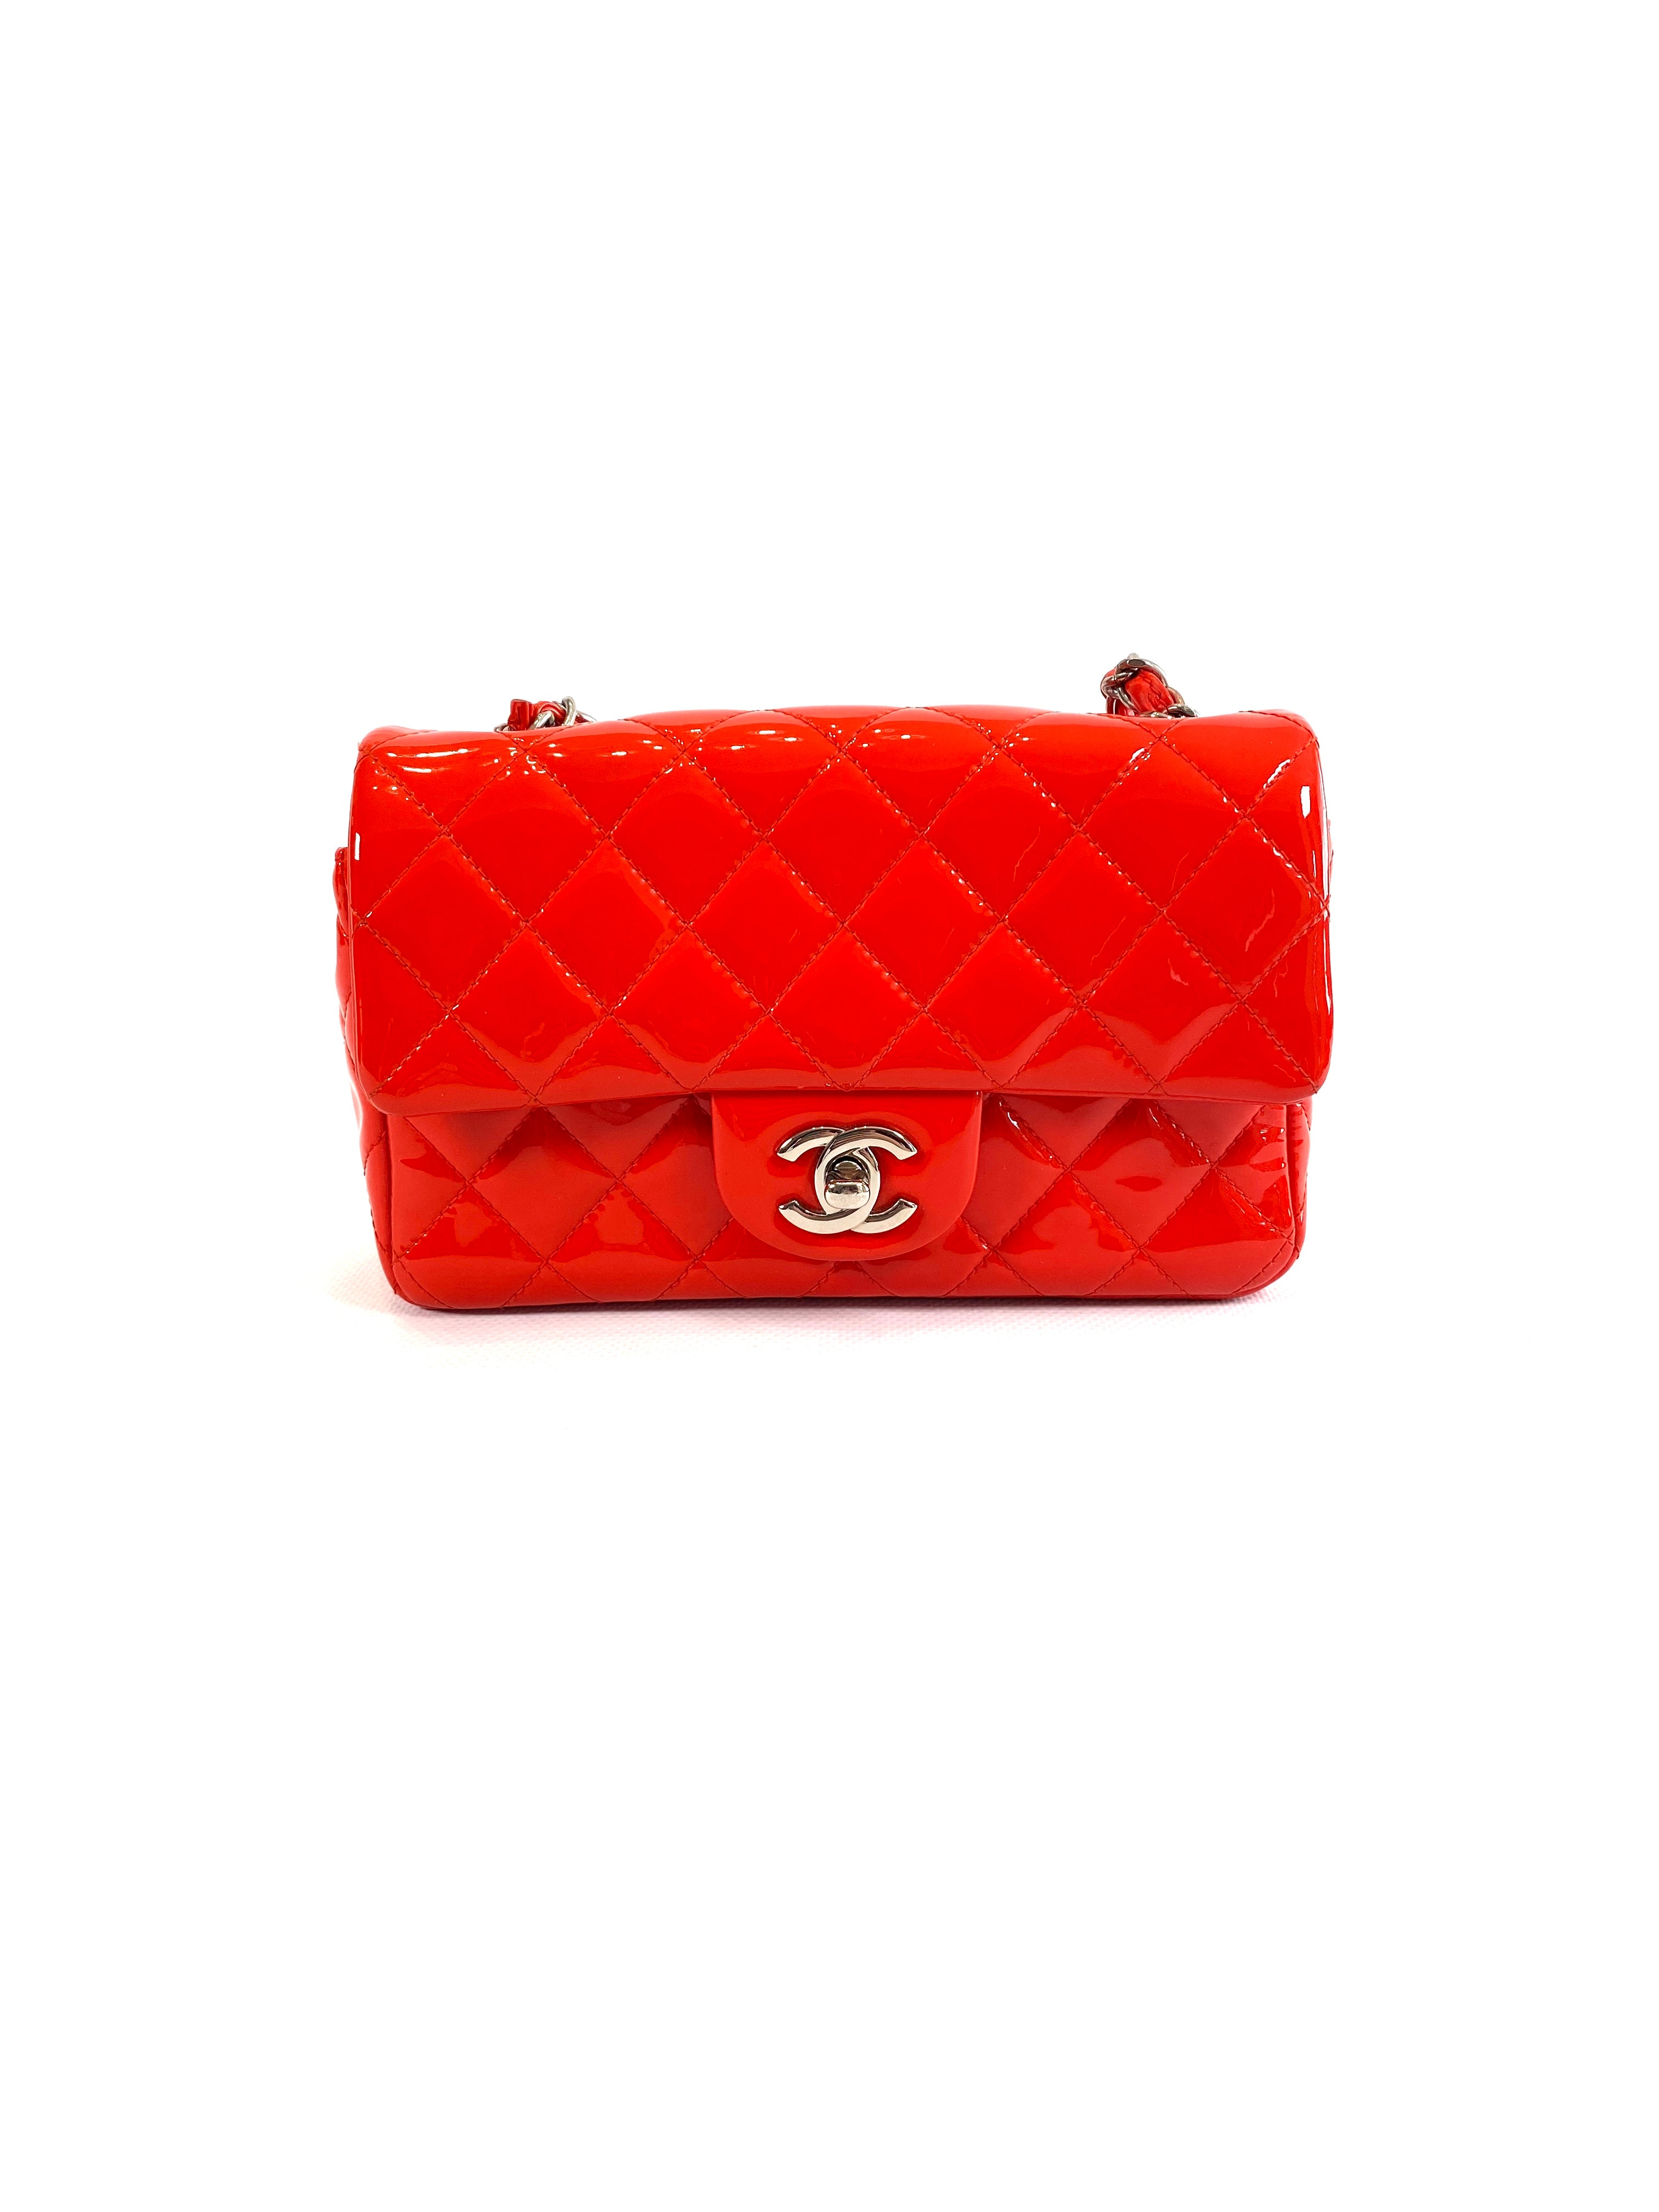 The Global Luxury Closet  Chanel Series 15 Sakura Pink Caviar Mini  rectangular flap bag Price  2800  shipping  feeCondition Pre owned very good condition  Some sign of wear including one